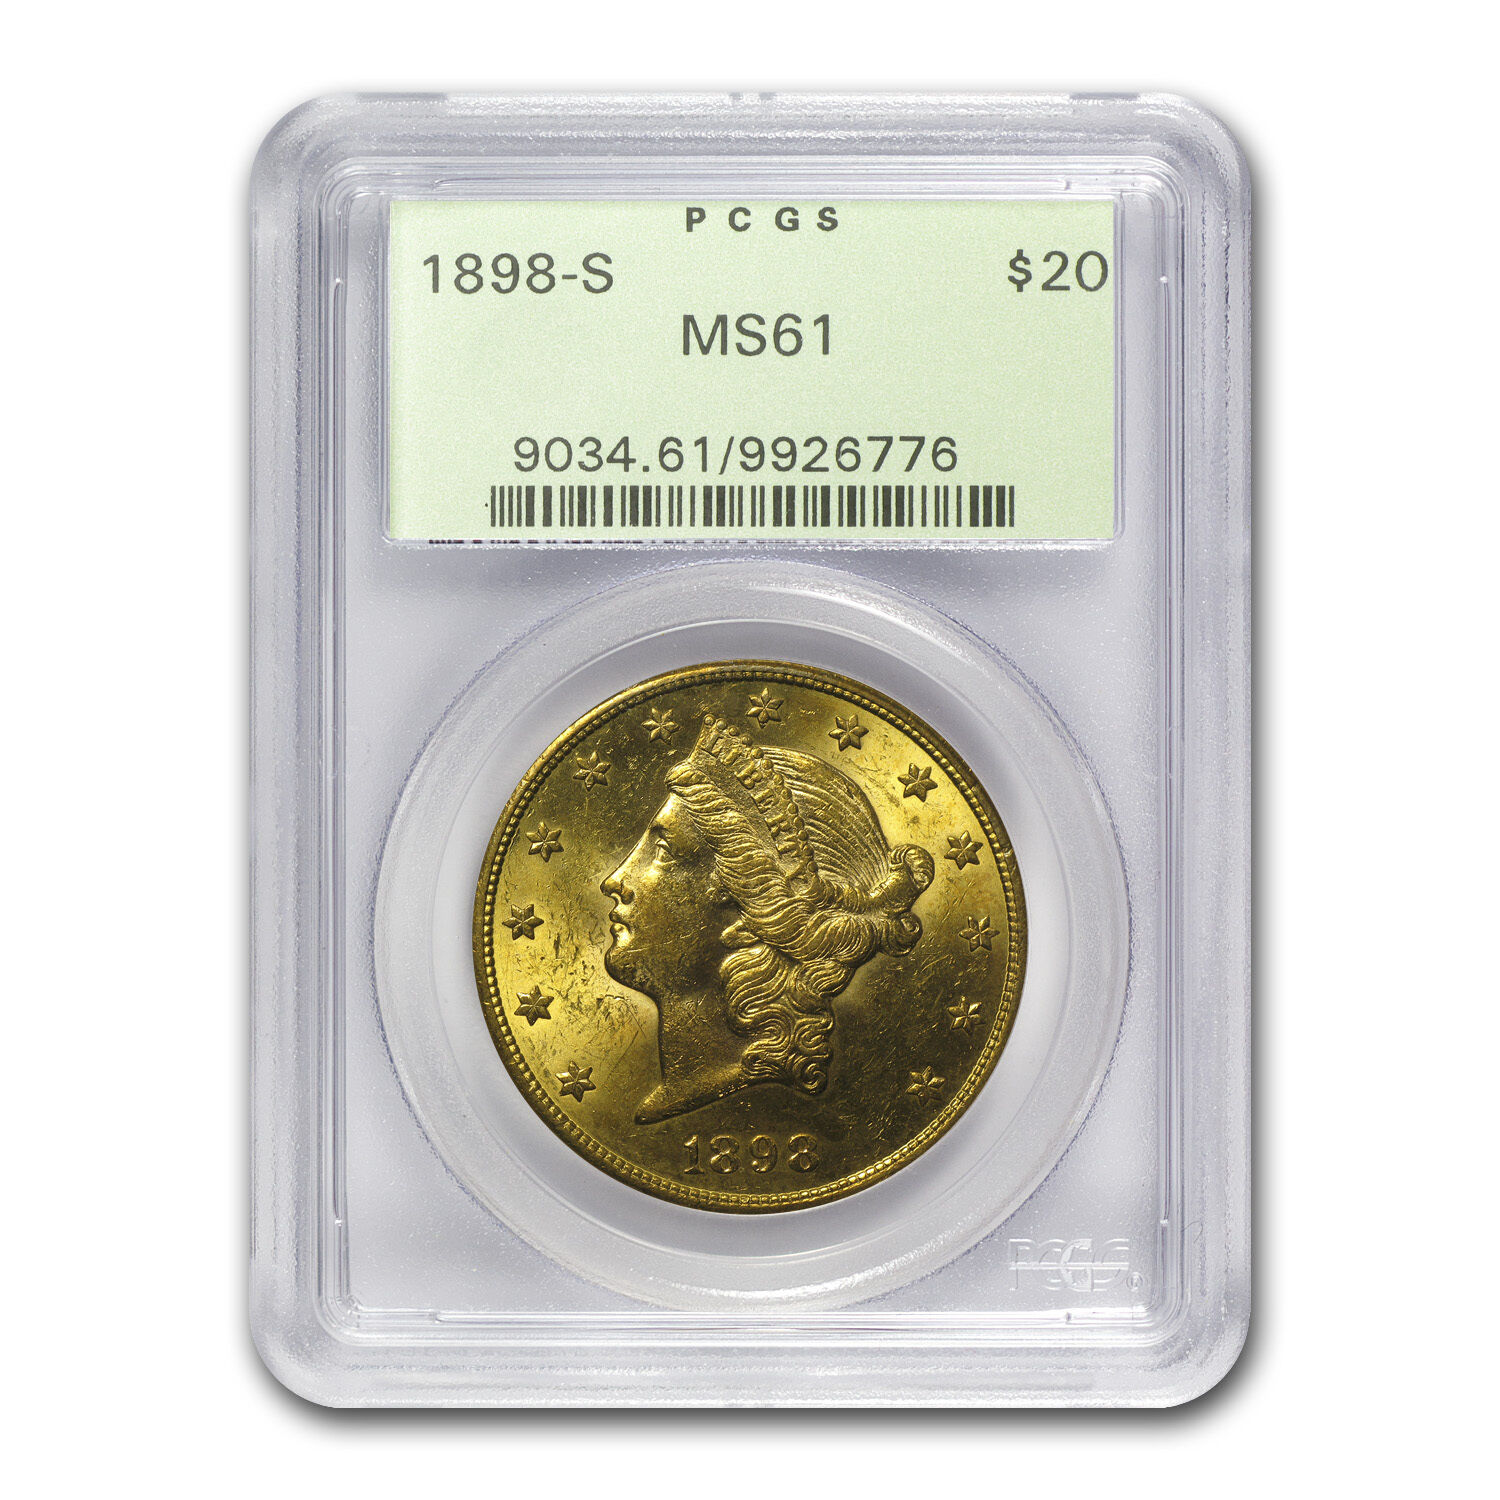 1800s S Mint Mark $20 Gold Liberty Double Eagle Coin - MS-61 PCGS